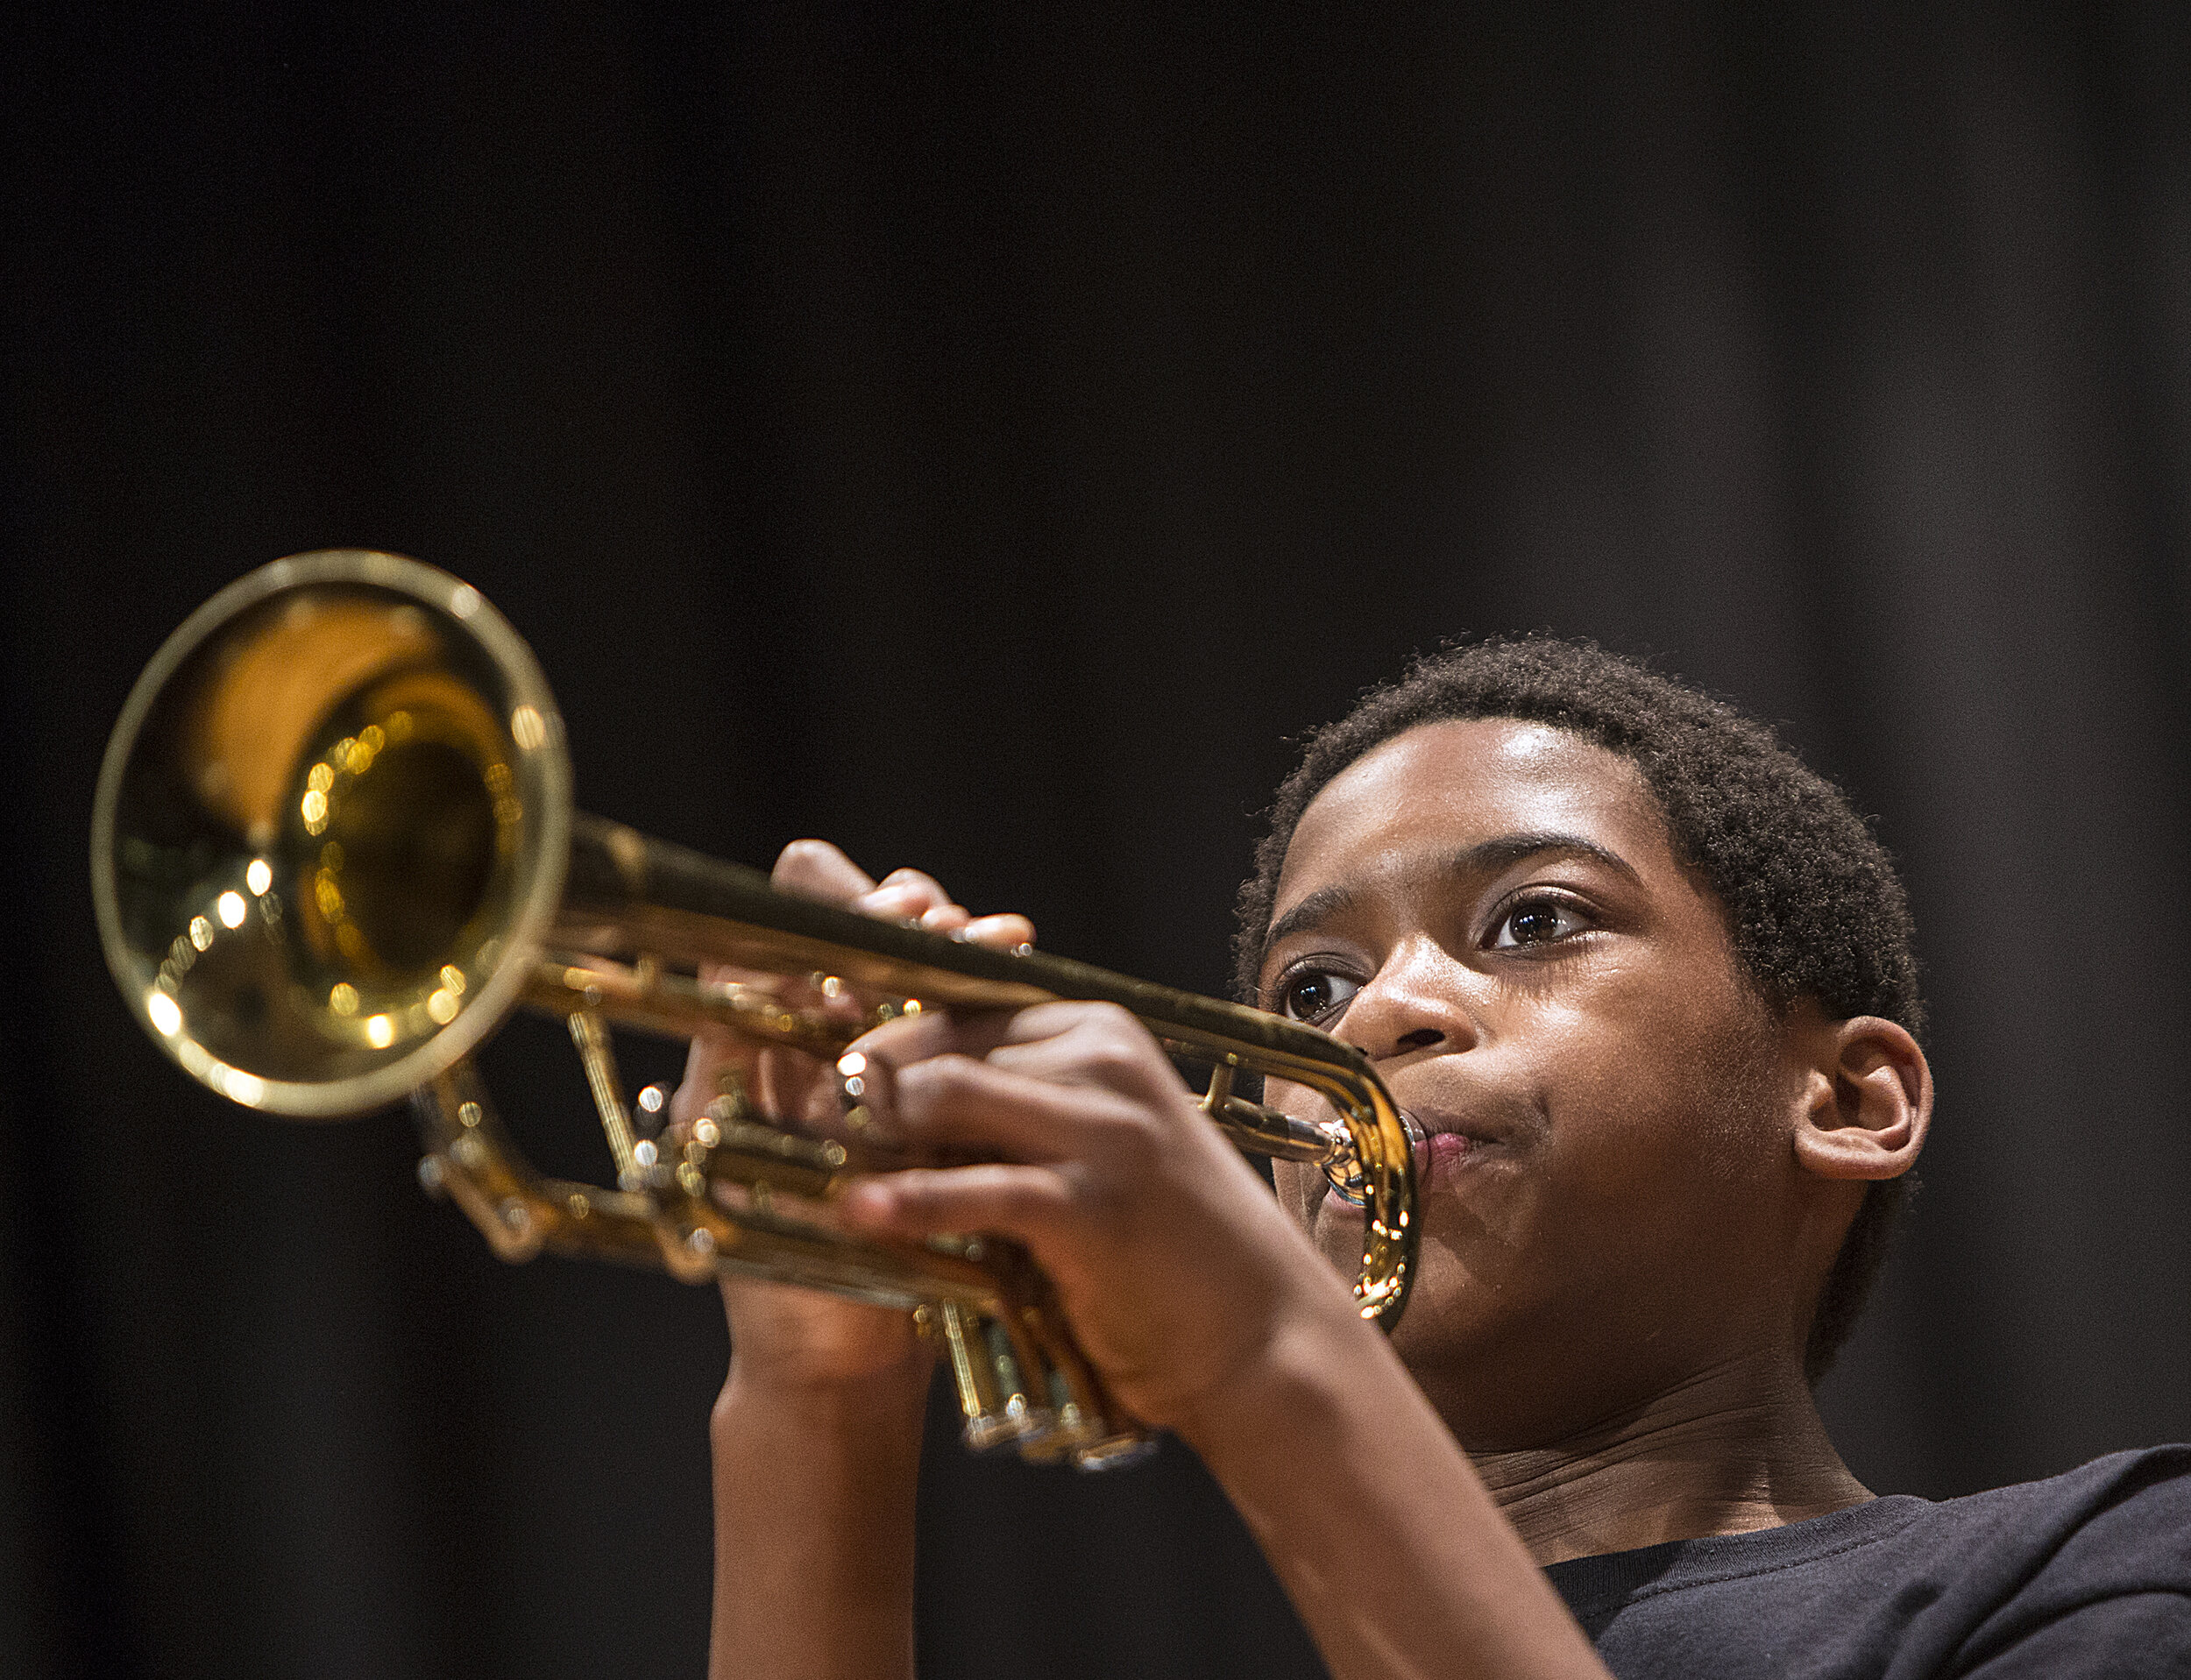 Young music novices feel the rush of playing like an HBCU band